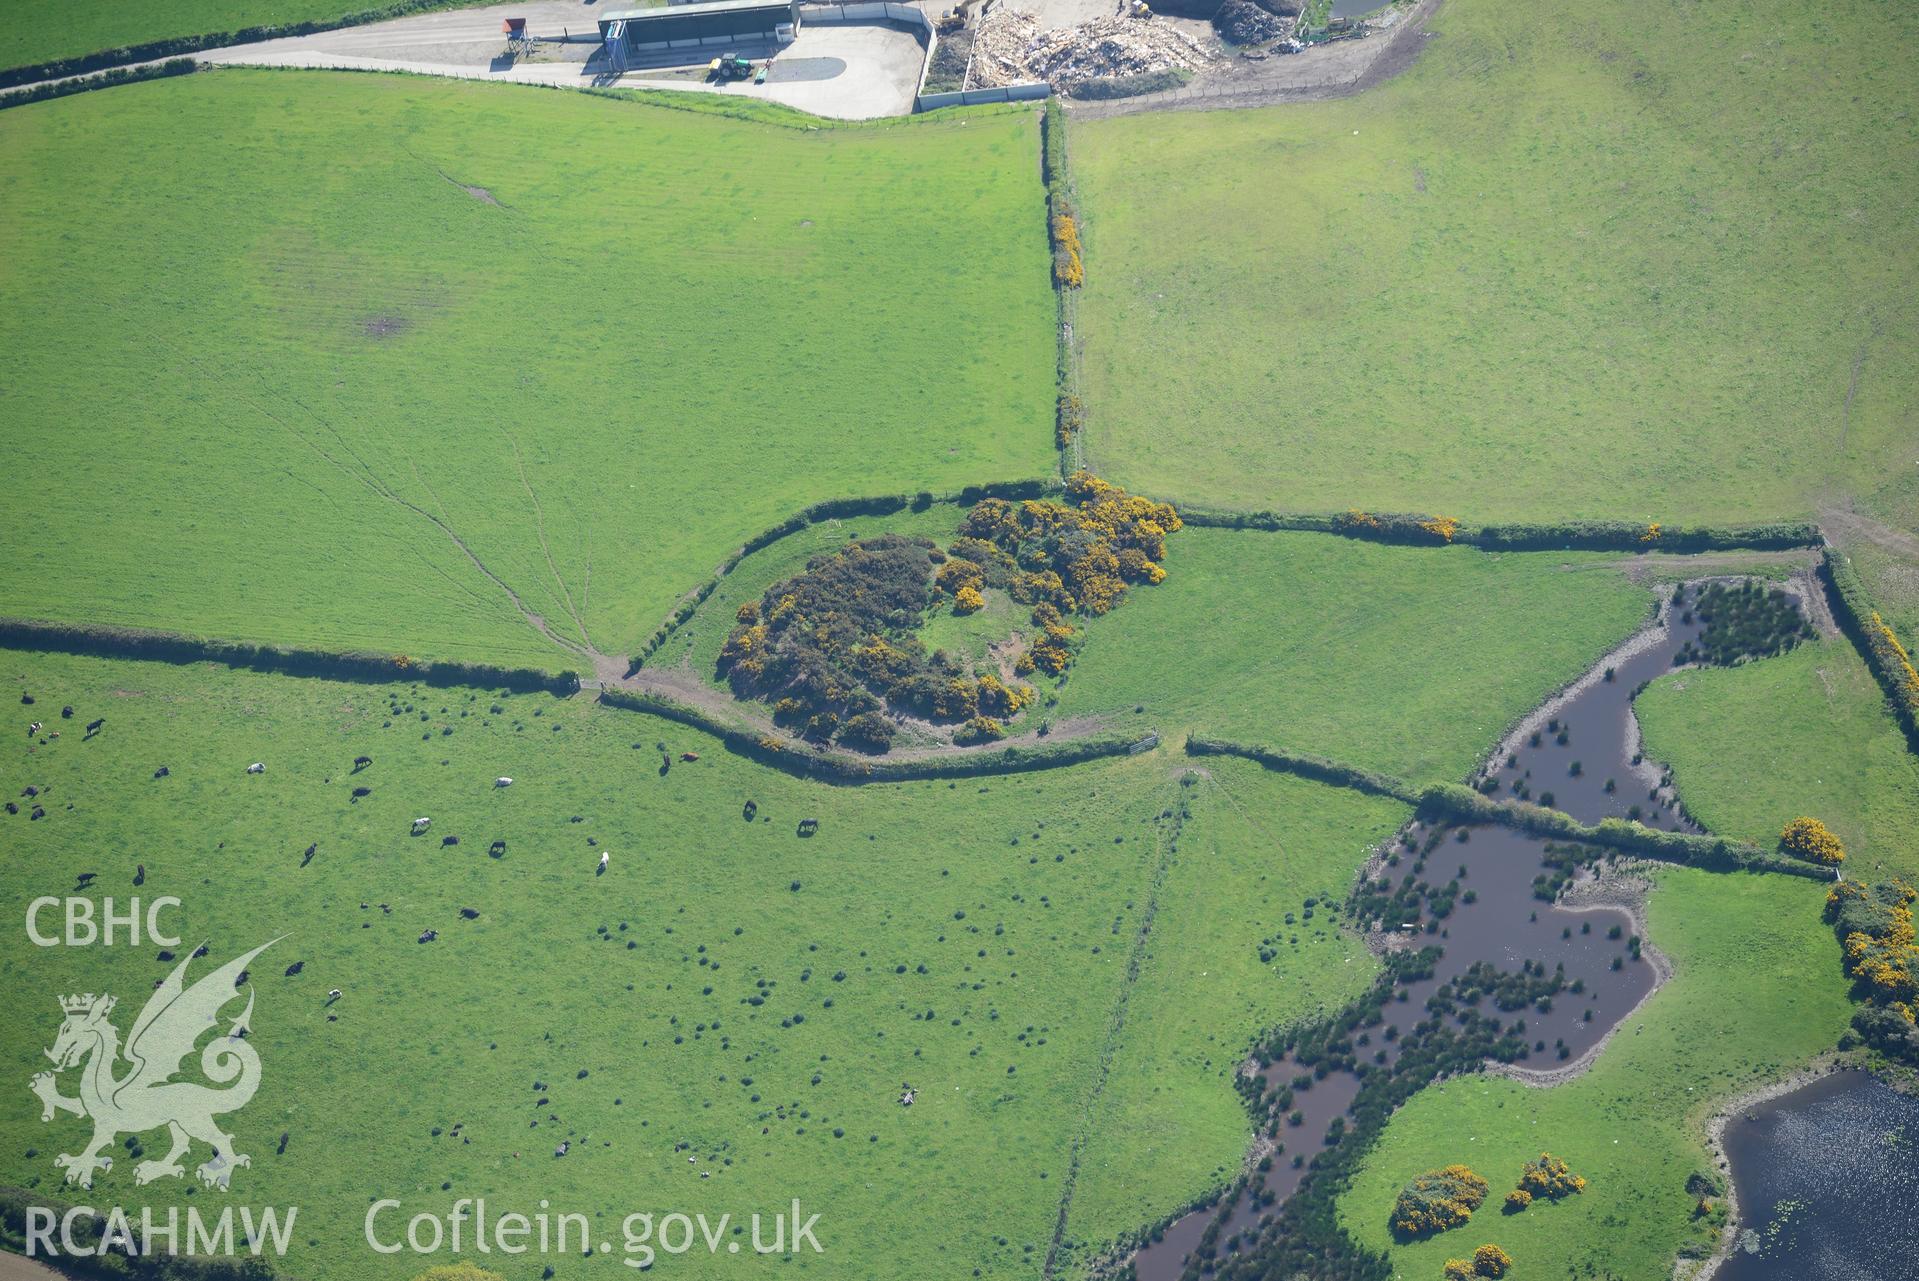 Aerial photography of Tomen Fawr taken on 3rd May 2017.  Baseline aerial reconnaissance survey for the CHERISH Project. ? Crown: CHERISH PROJECT 2017. Produced with EU funds through the Ireland Wales Co-operation Programme 2014-2020. All material made fr